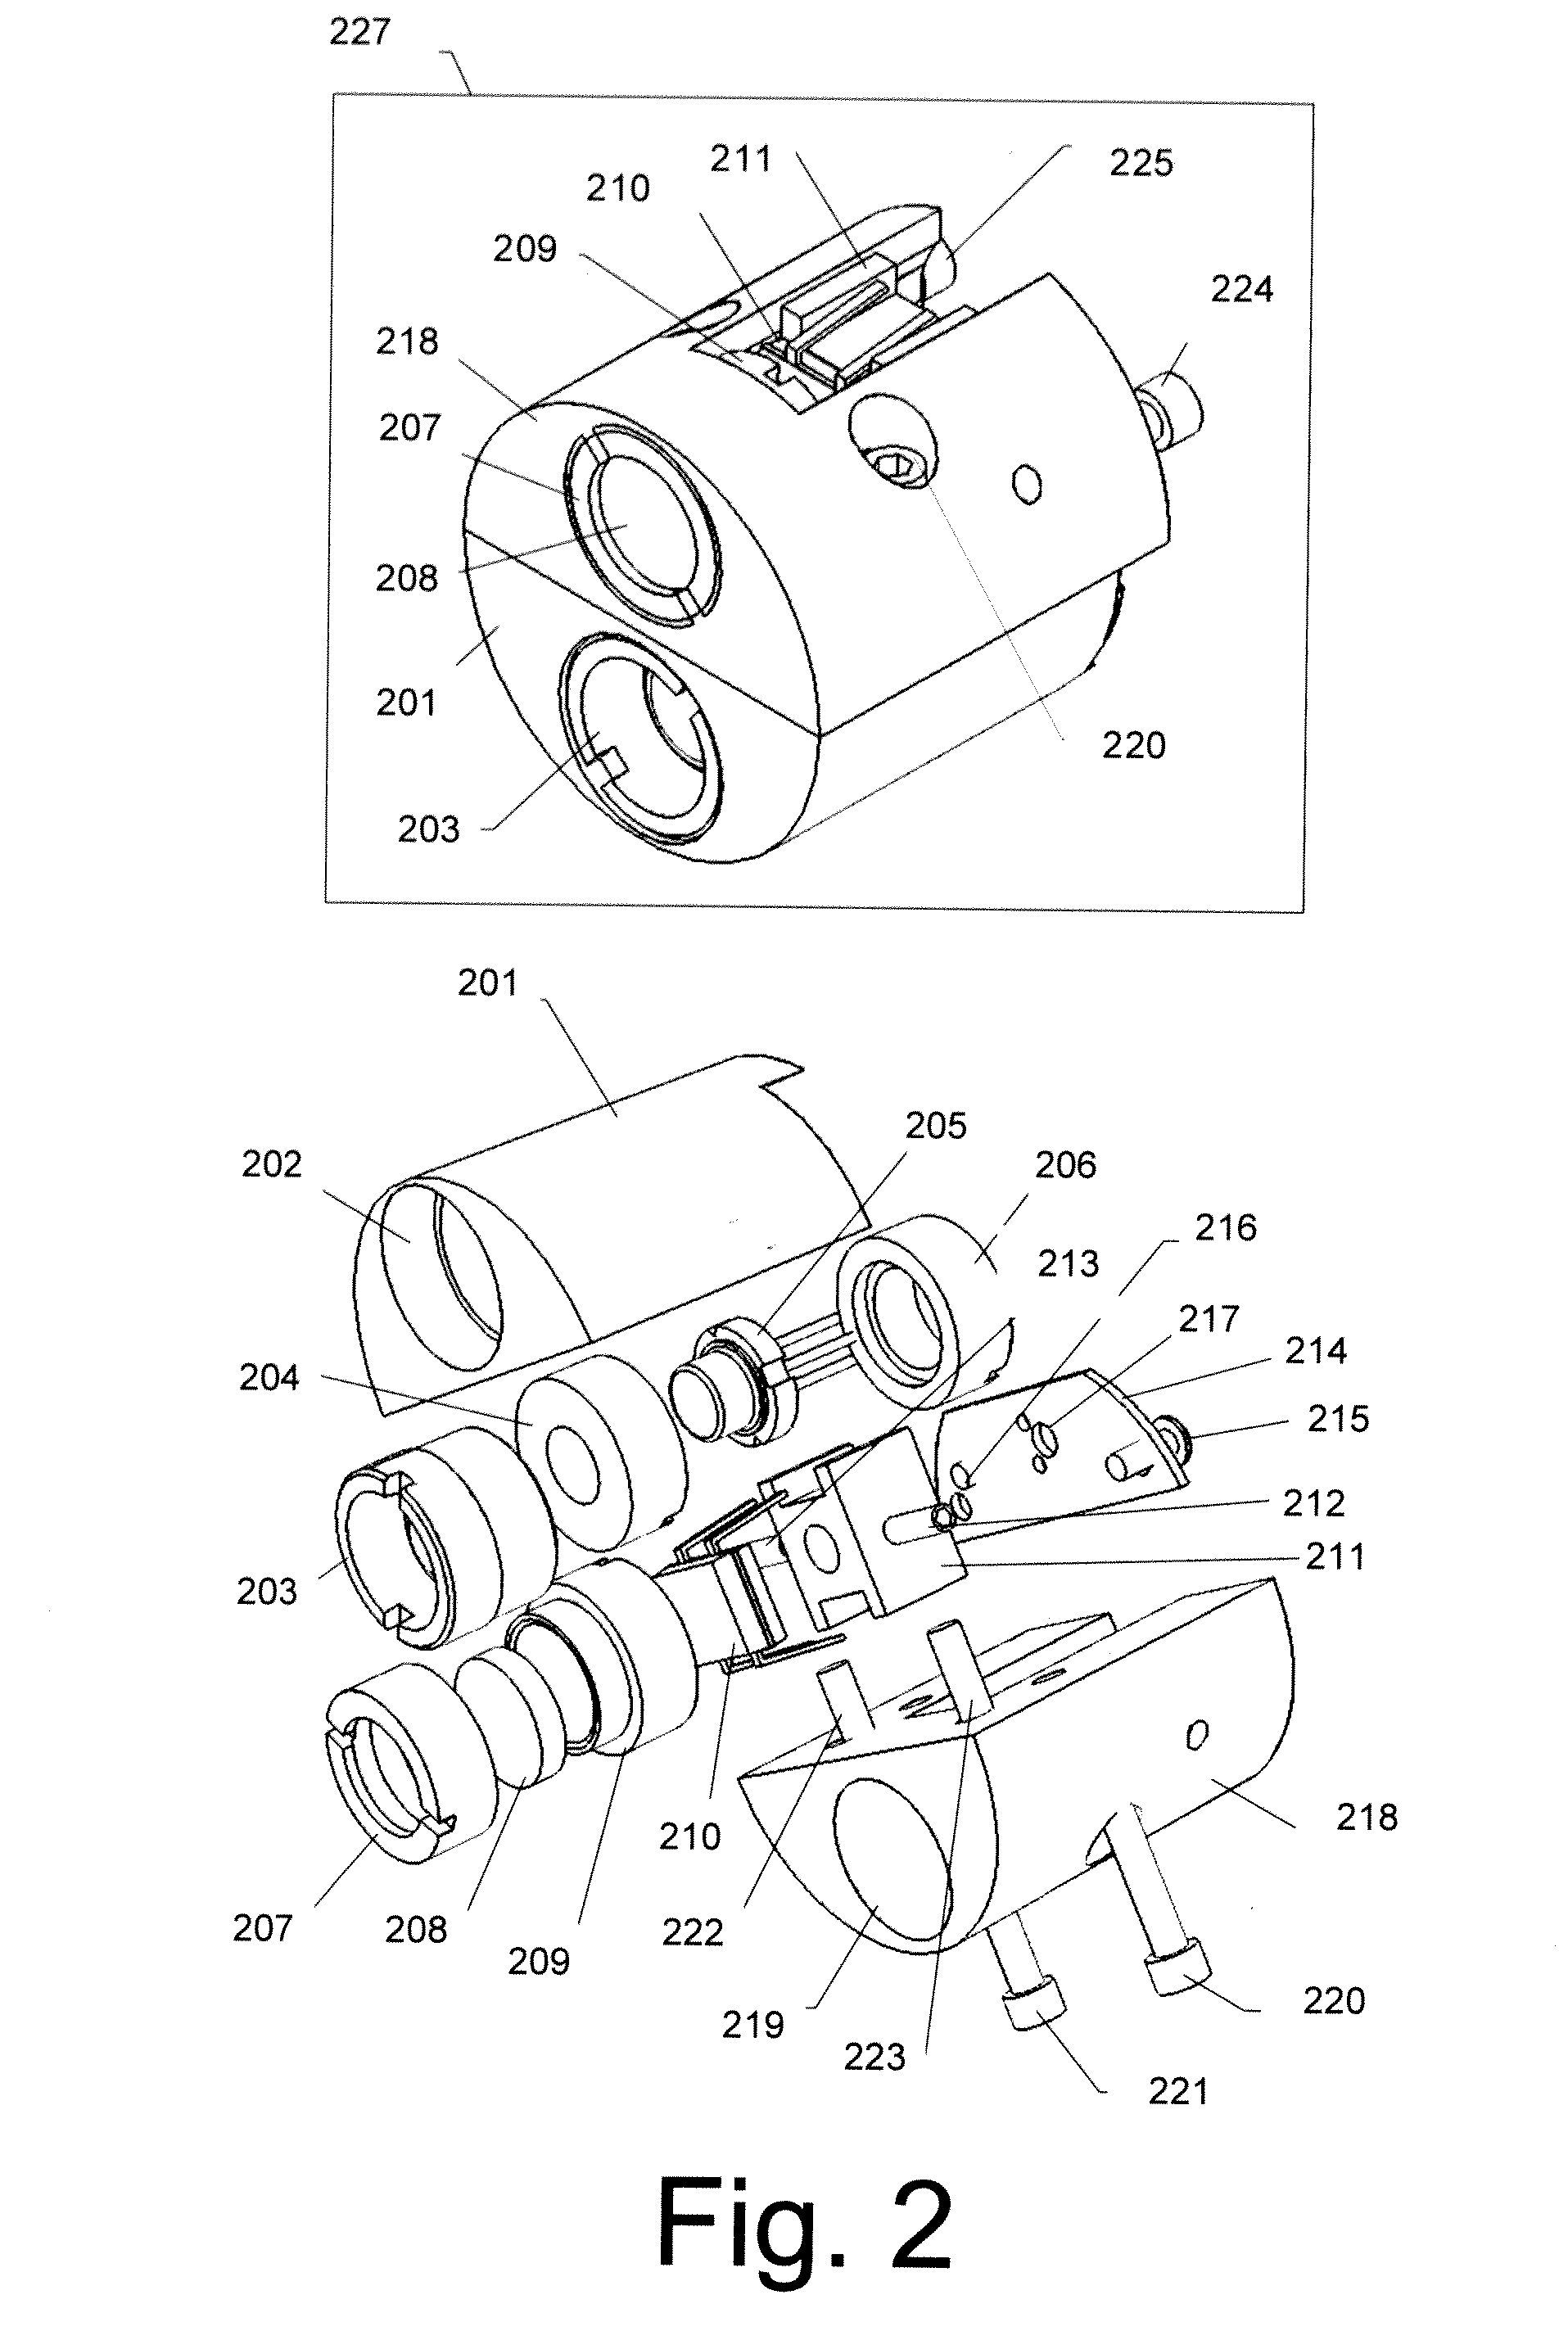 Optical impact control system